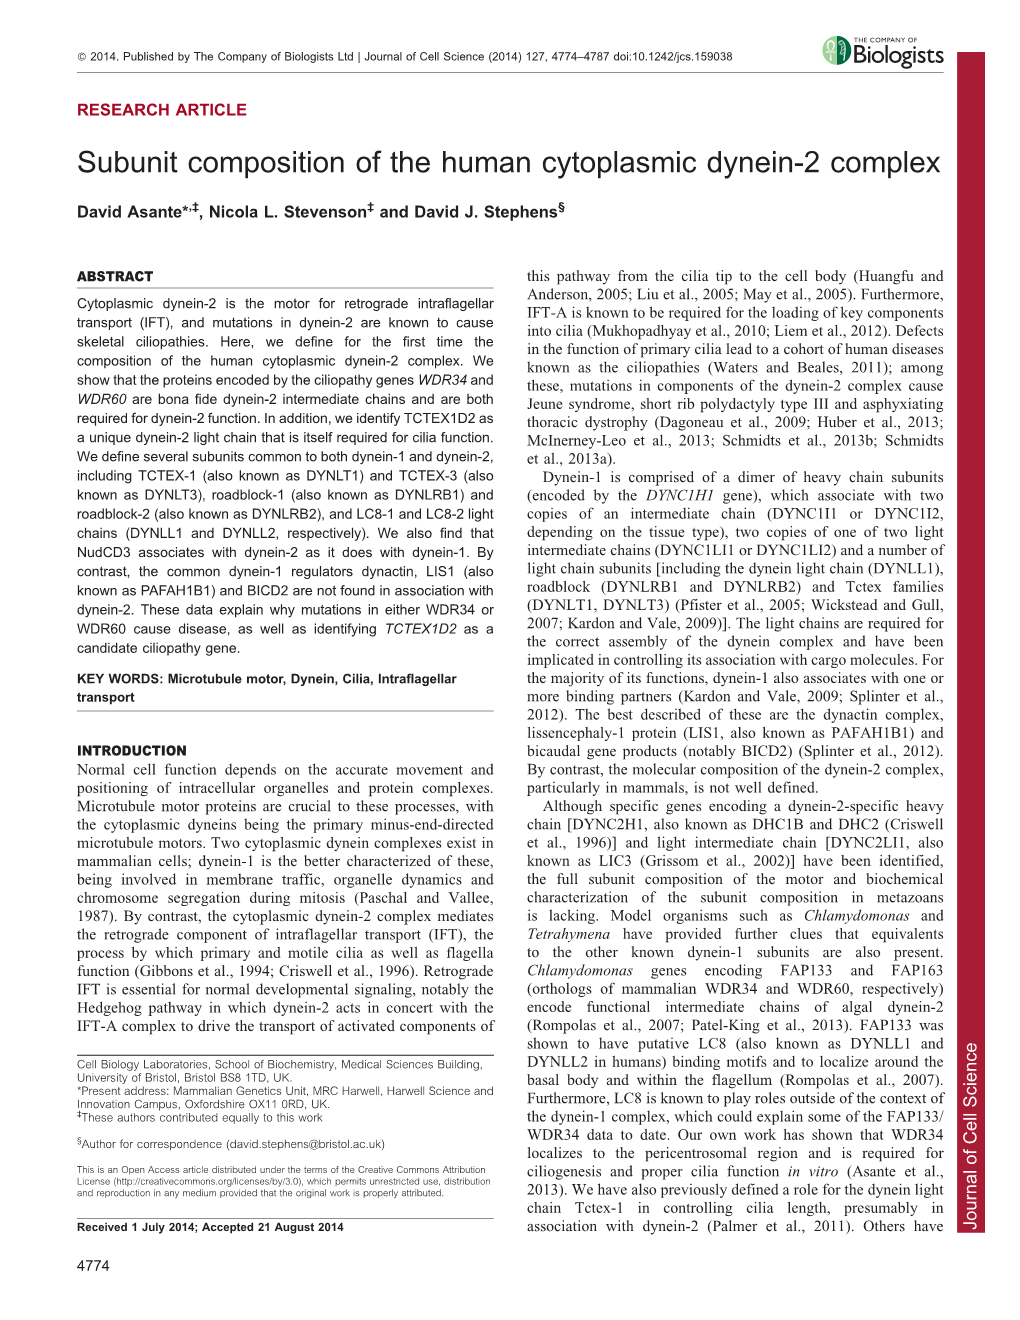 Subunit Composition of the Human Cytoplasmic Dynein-2 Complex